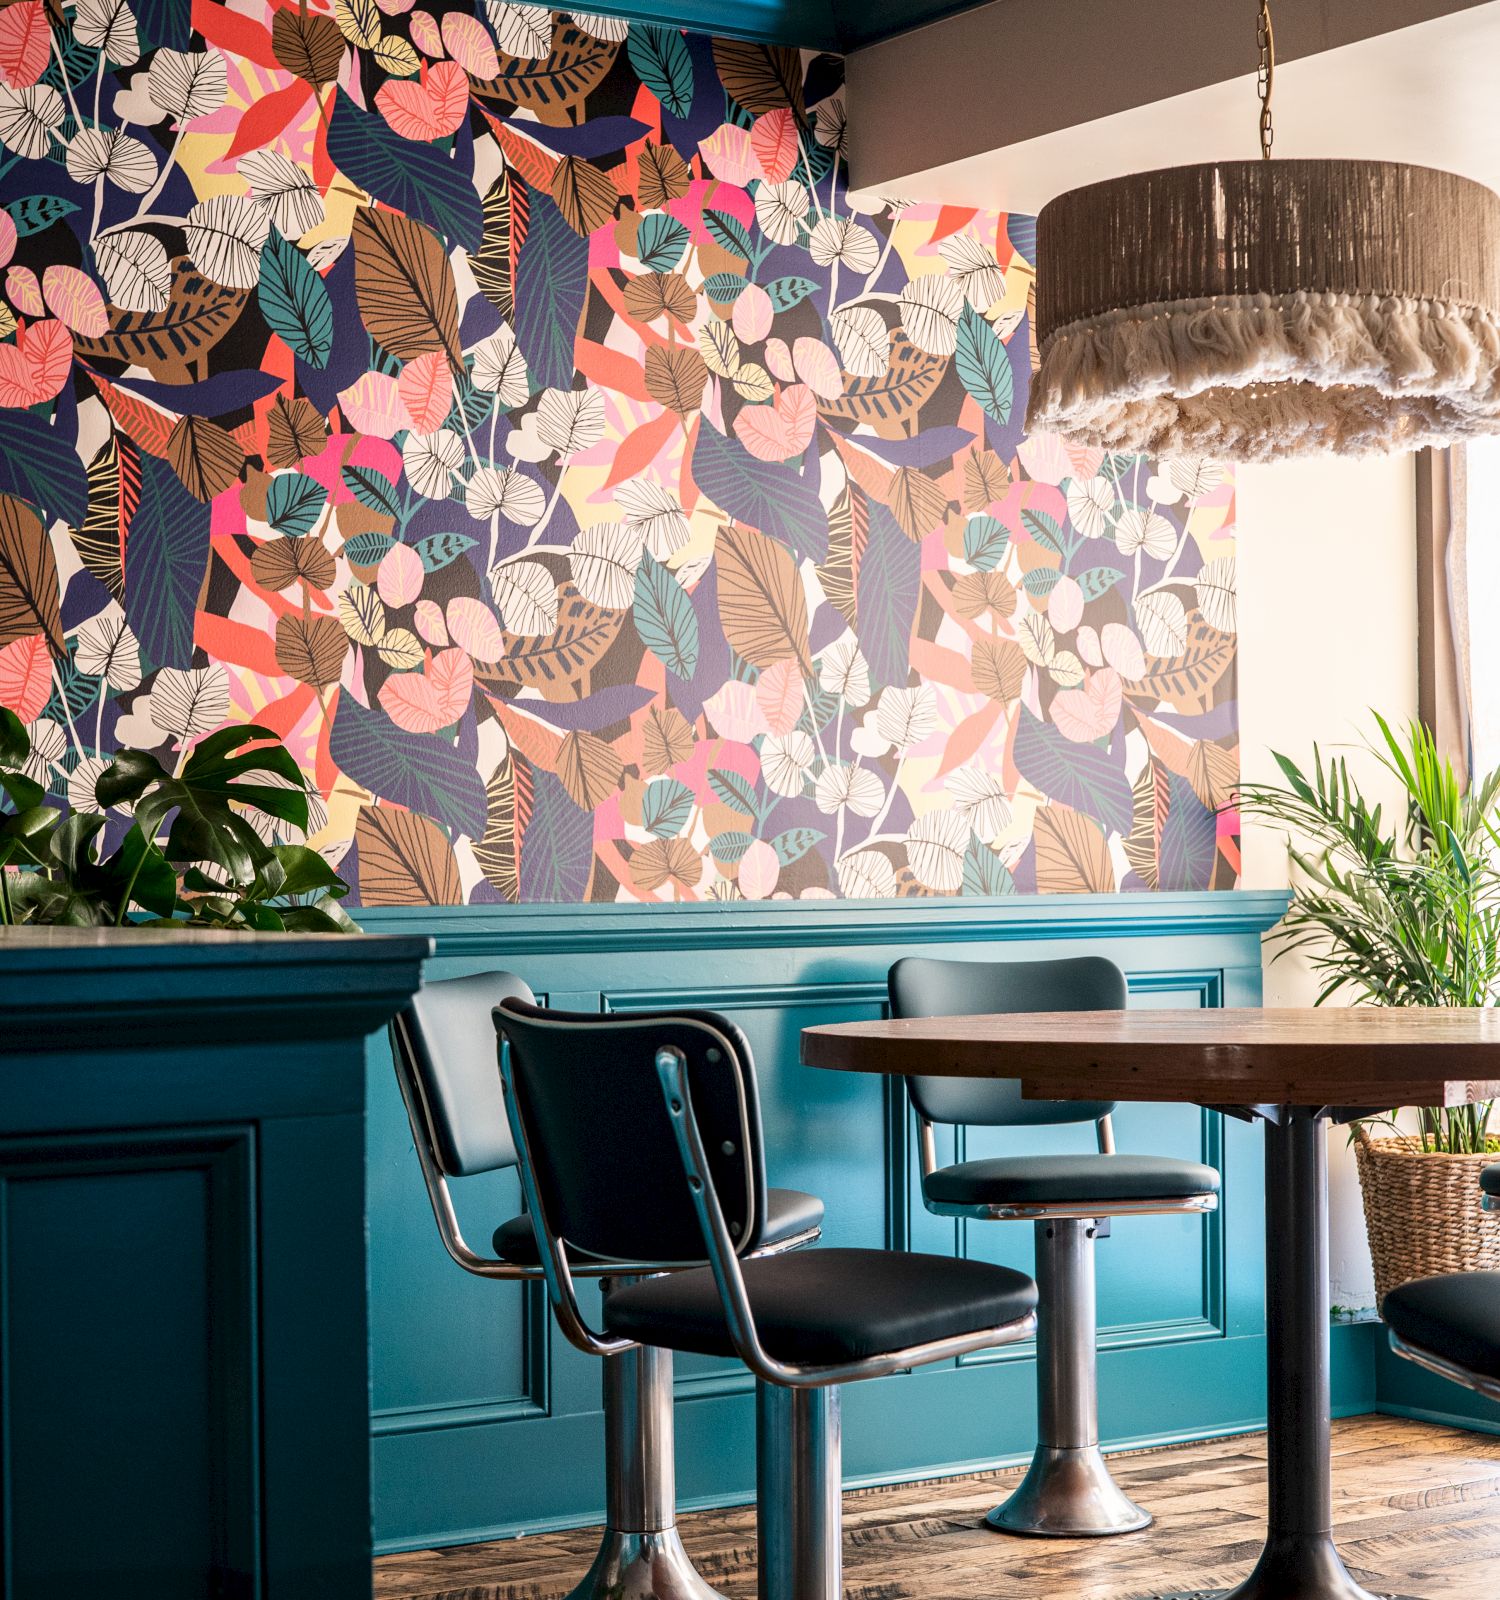 A cozy cafe with colorful floral wallpaper, teal paneling, wooden flooring, modern chairs around tables, and a funky fringe lampshade.